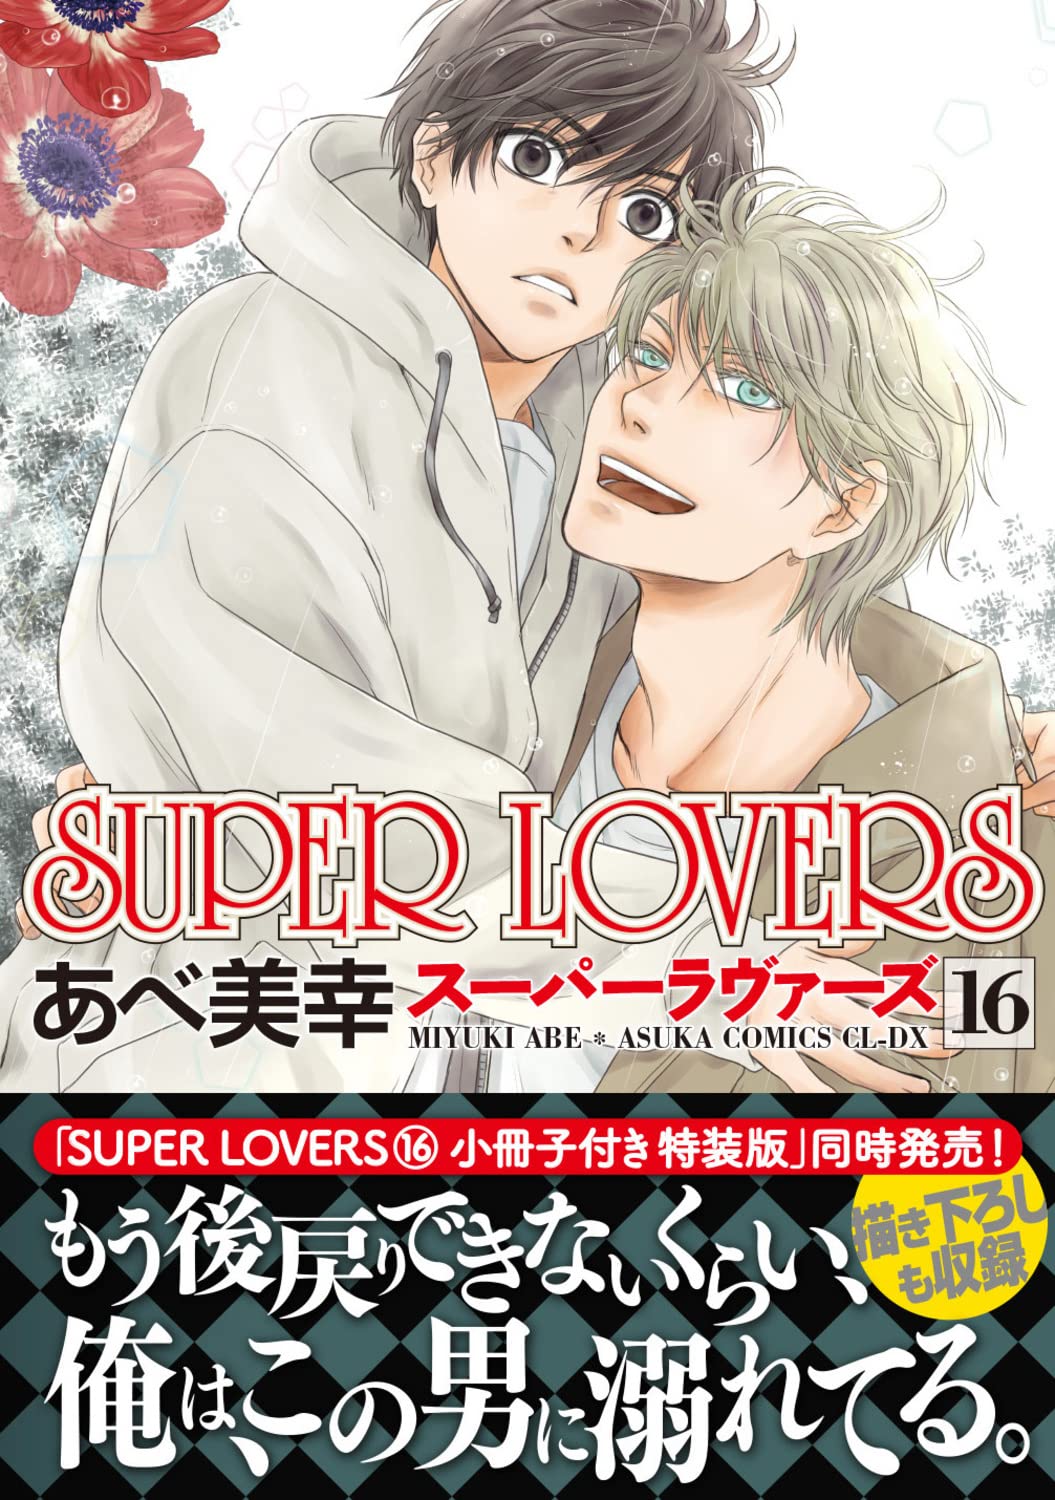 SUPER LOVERS 16 – Japanese Book Store